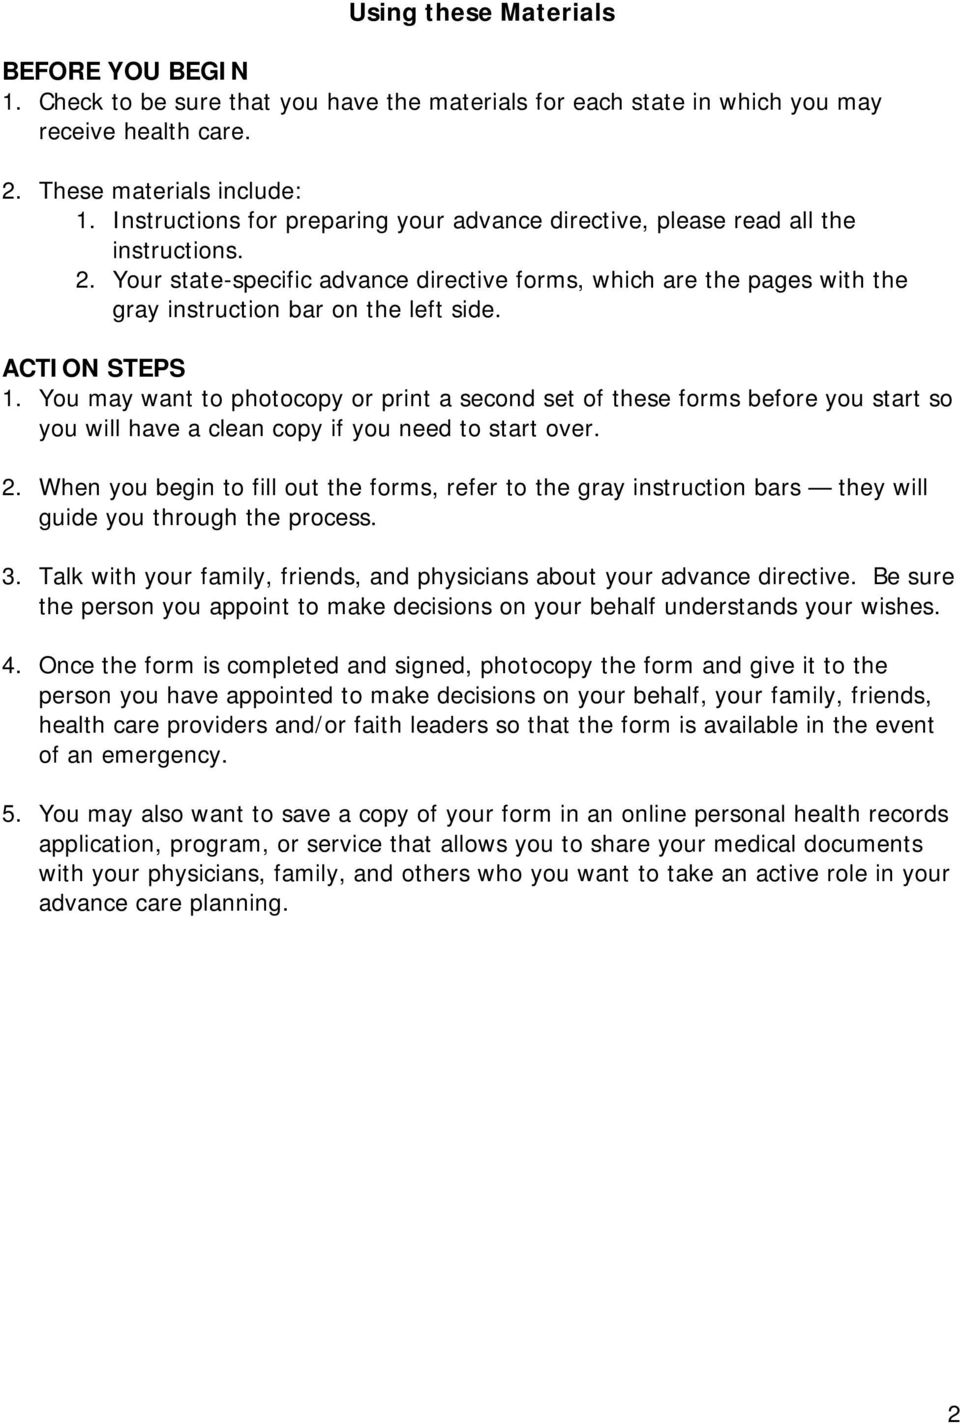 ACTION STEPS 1. You may want to photocopy or print a second set of these forms before you start so you will have a clean copy if you need to start over. 2.